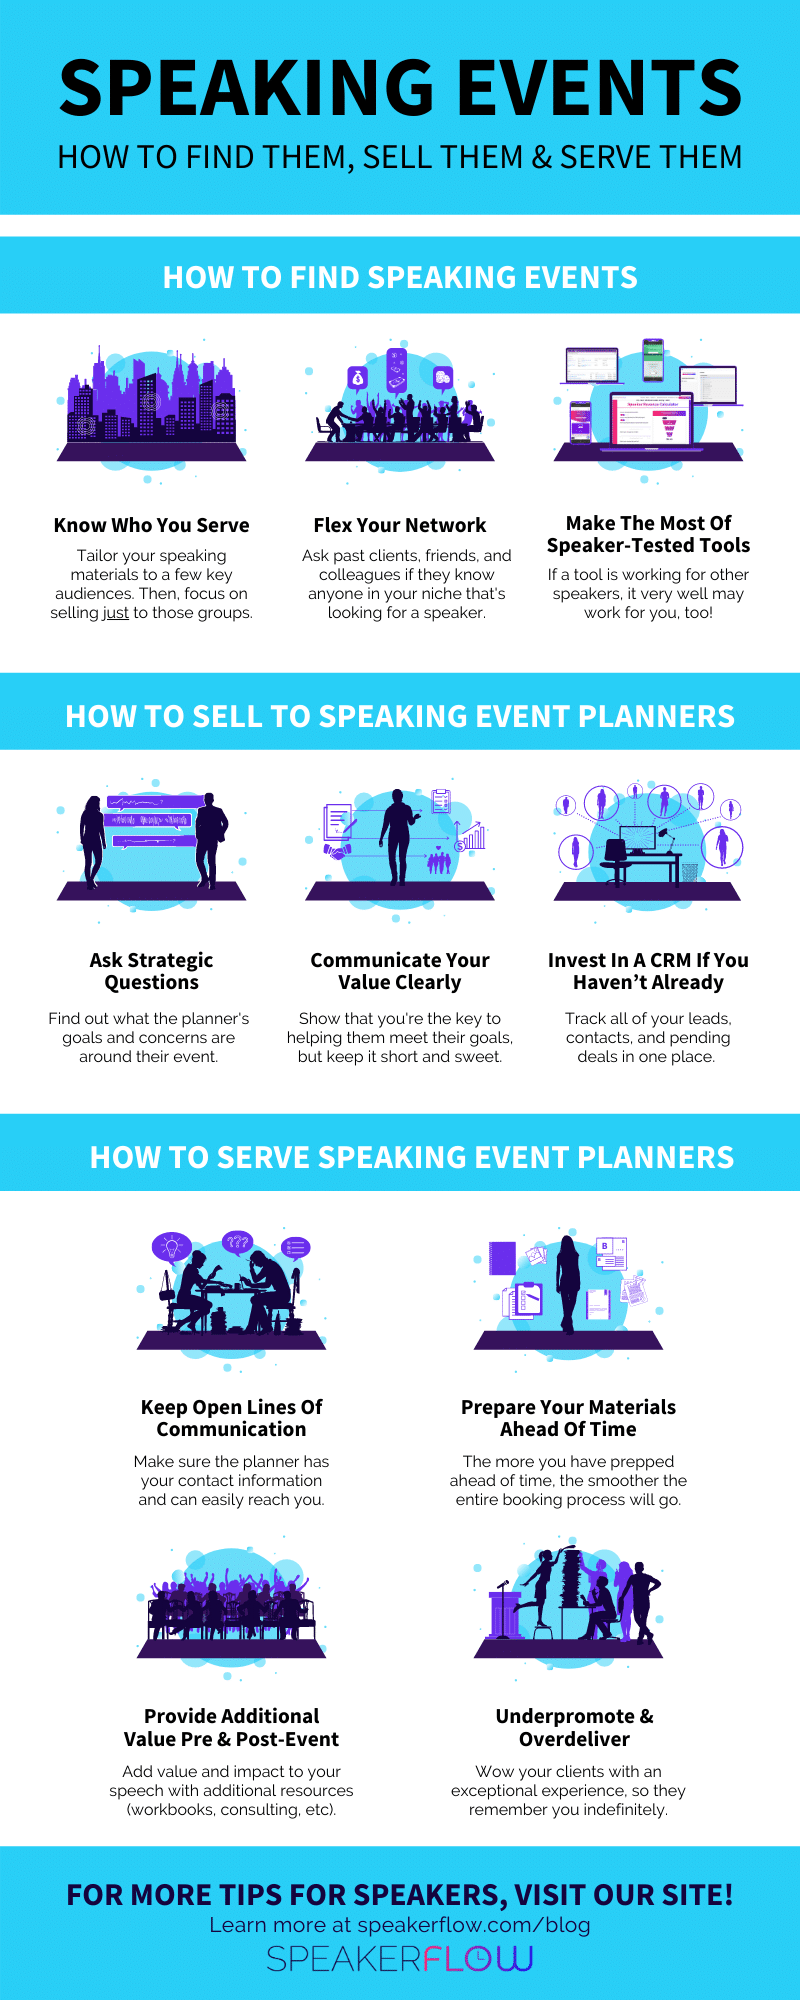 Infographic for Speaking Events How To Find Them Sell Them And Serve Them - SpeakerFlow